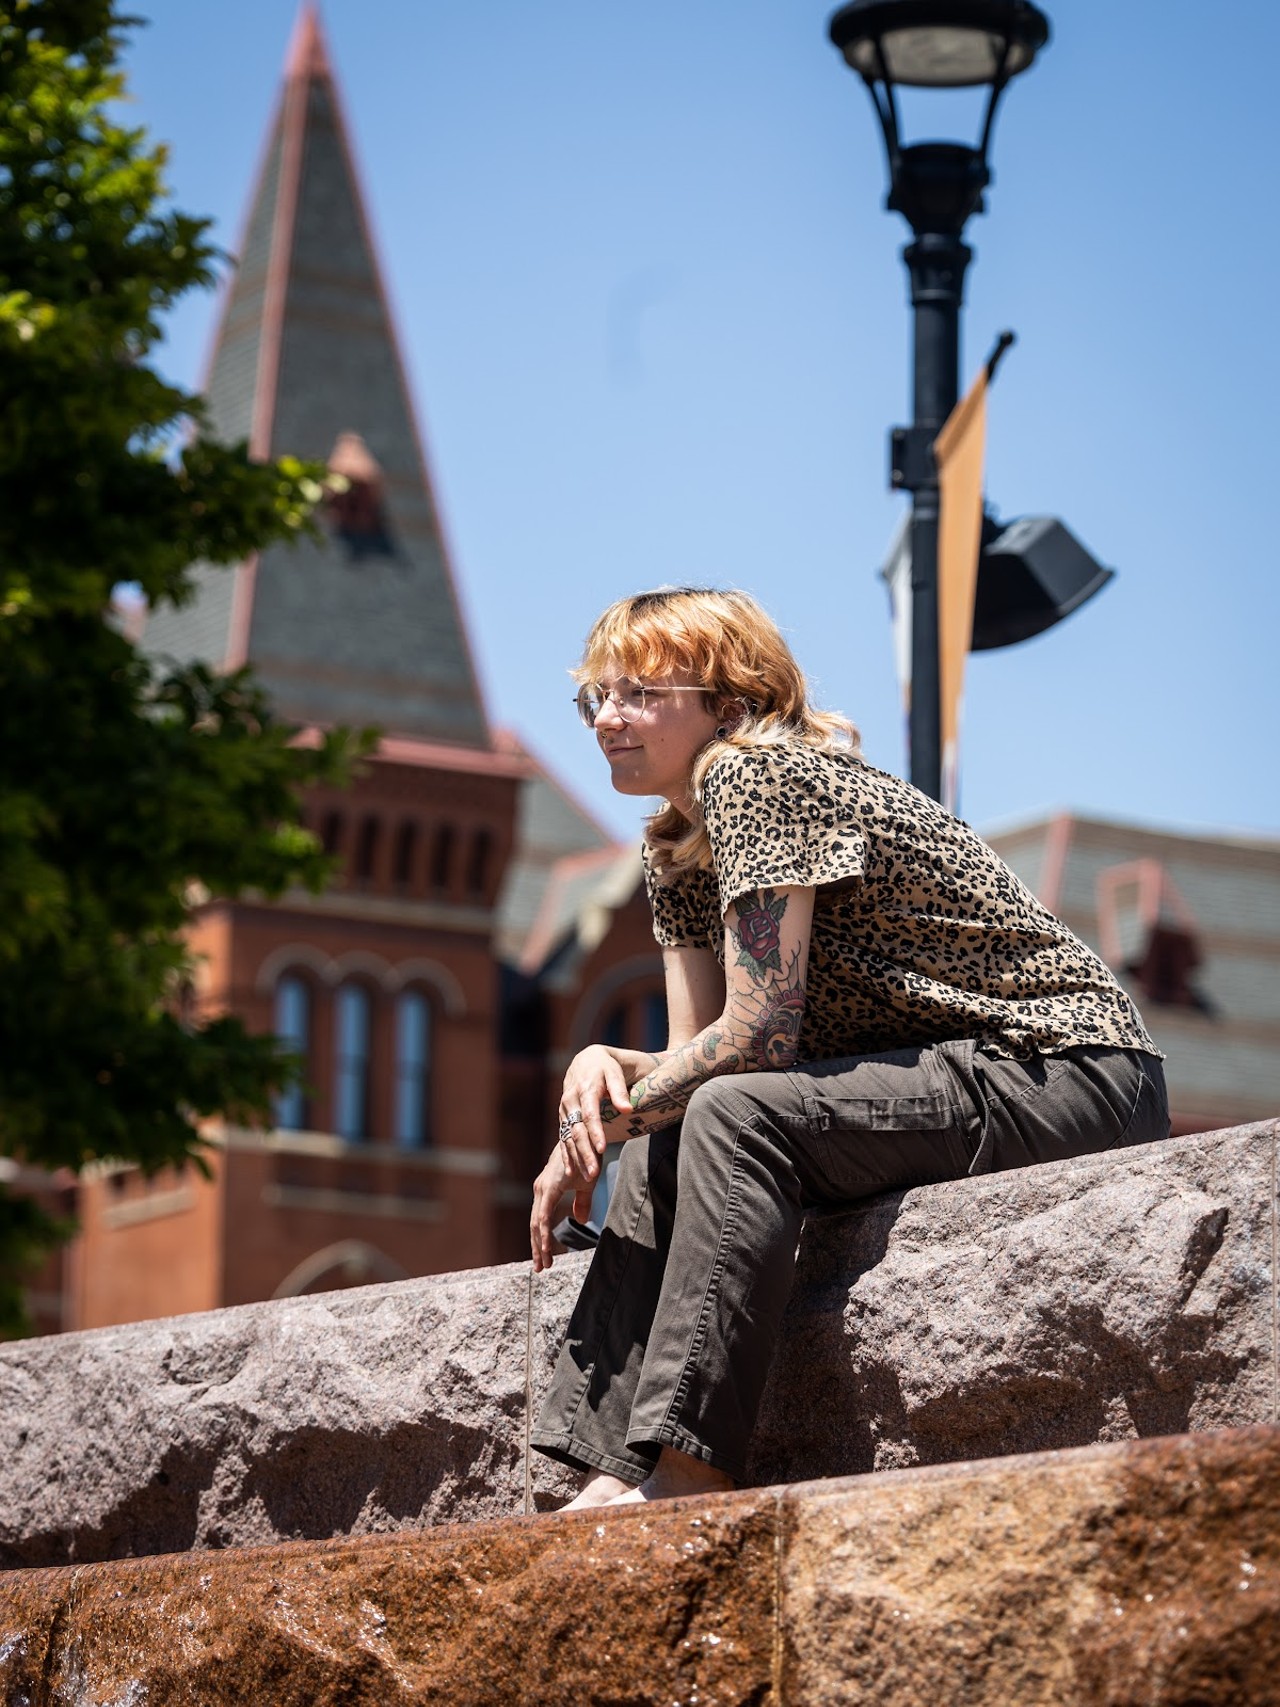 Milo, a local resident, sits atop the waterfall staircase at Washington Park. Milo is an artist in Cincinnati and was spending their free time before work basking in the sun and soaking their feet in the fountain. Milo works at the Contemporary Art Museum as a receptionist. “I didn’t really have a plan before I got here. I just wandered up and saw that they turned the fountains on," they said.